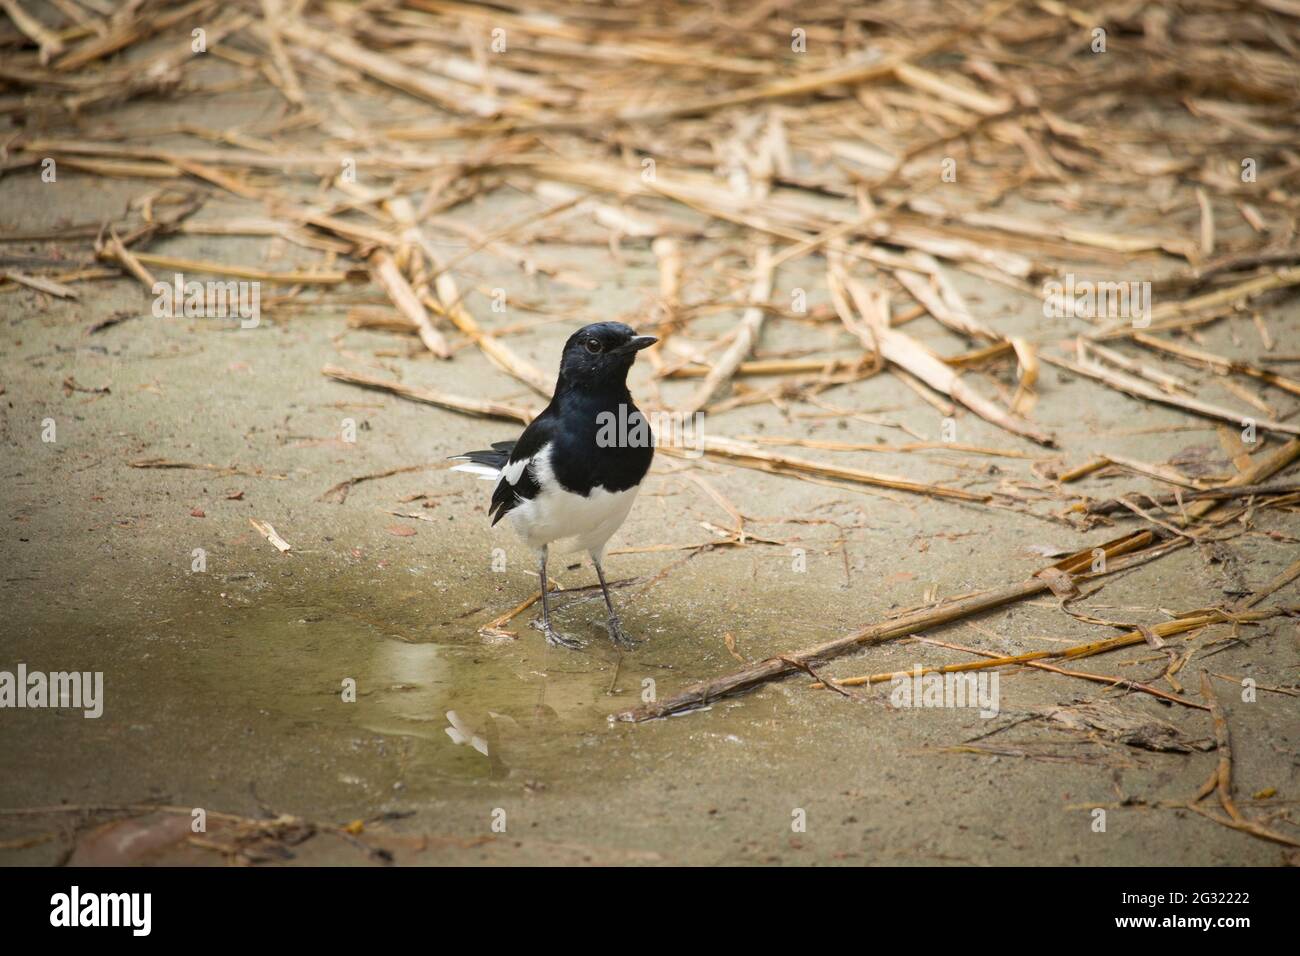 The magpie robin is standing on the ground Stock Photo